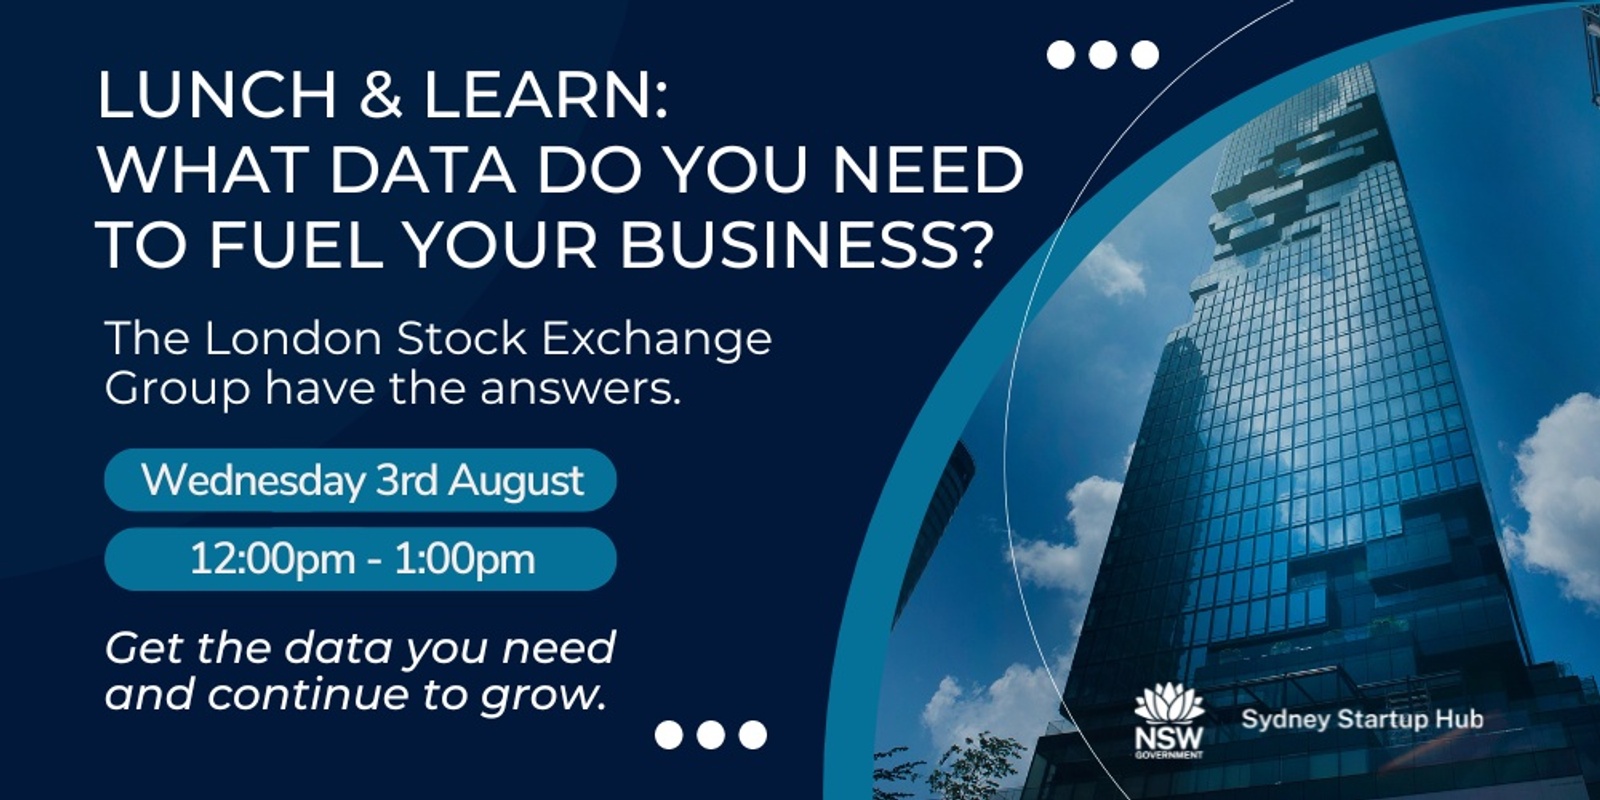 Lunch and Learn: What data do you need to fuel your business?